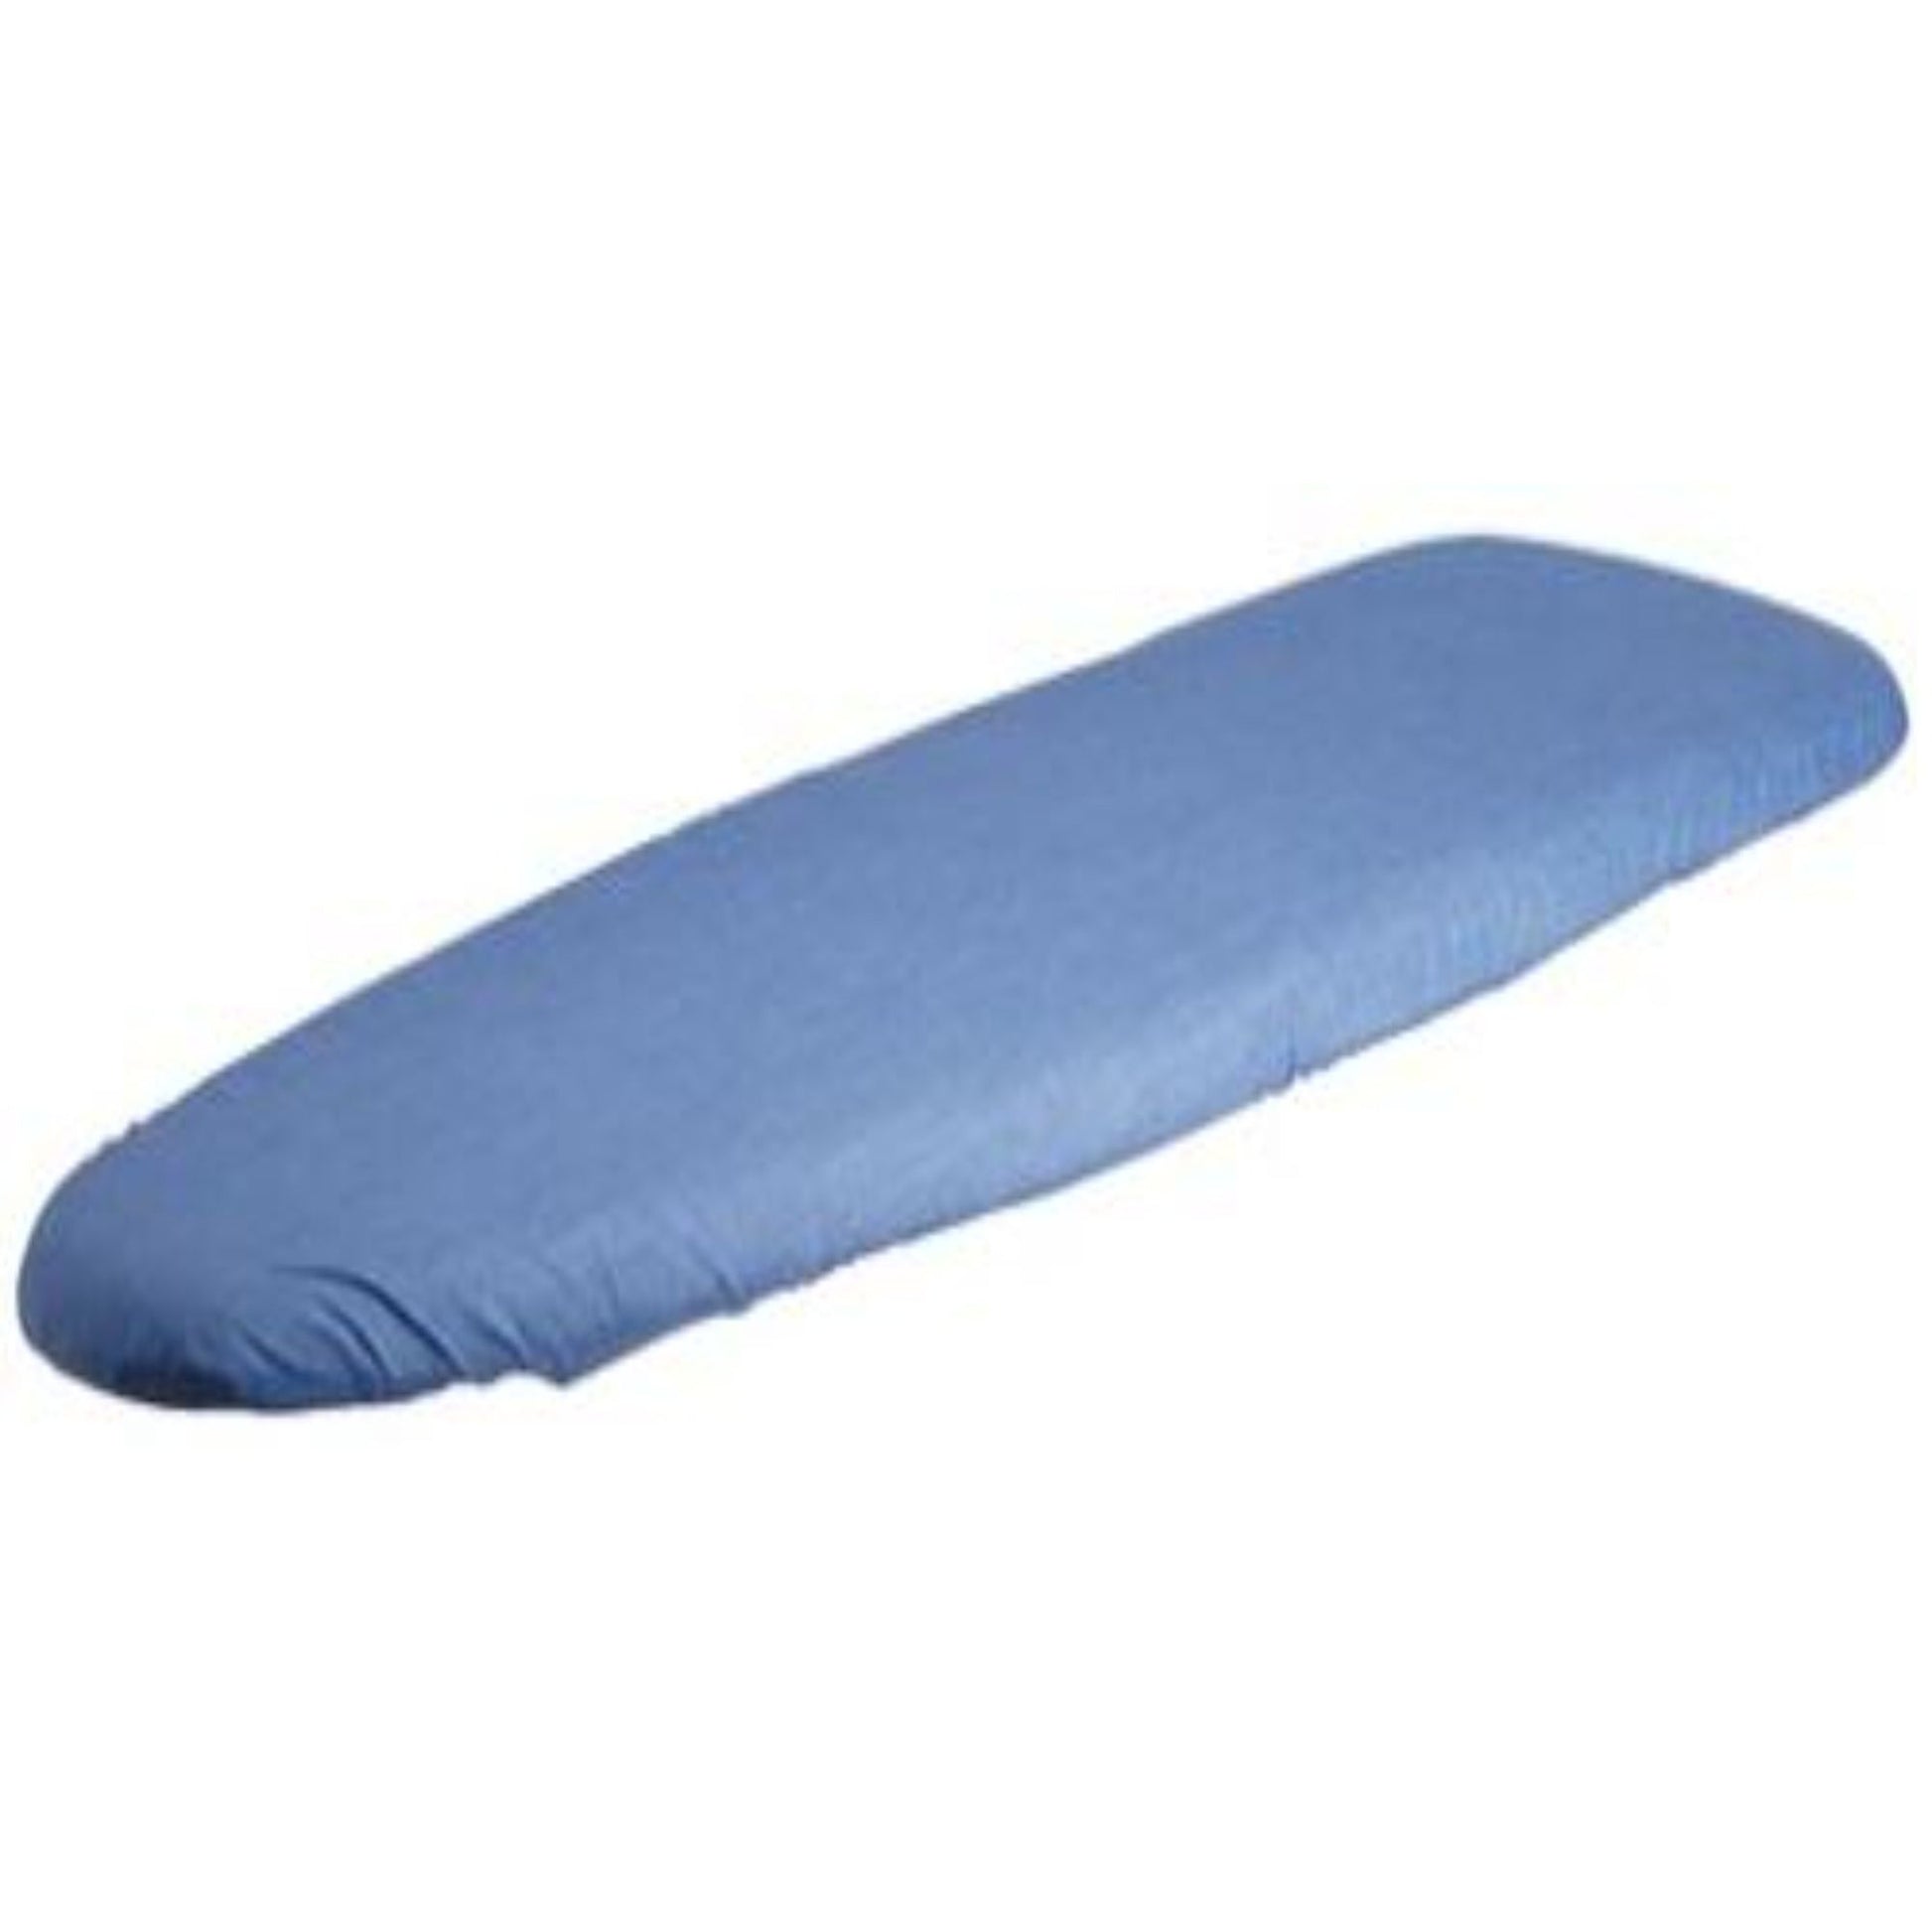 Pressto Valet Ironing Board Cover/Pad ~ blue